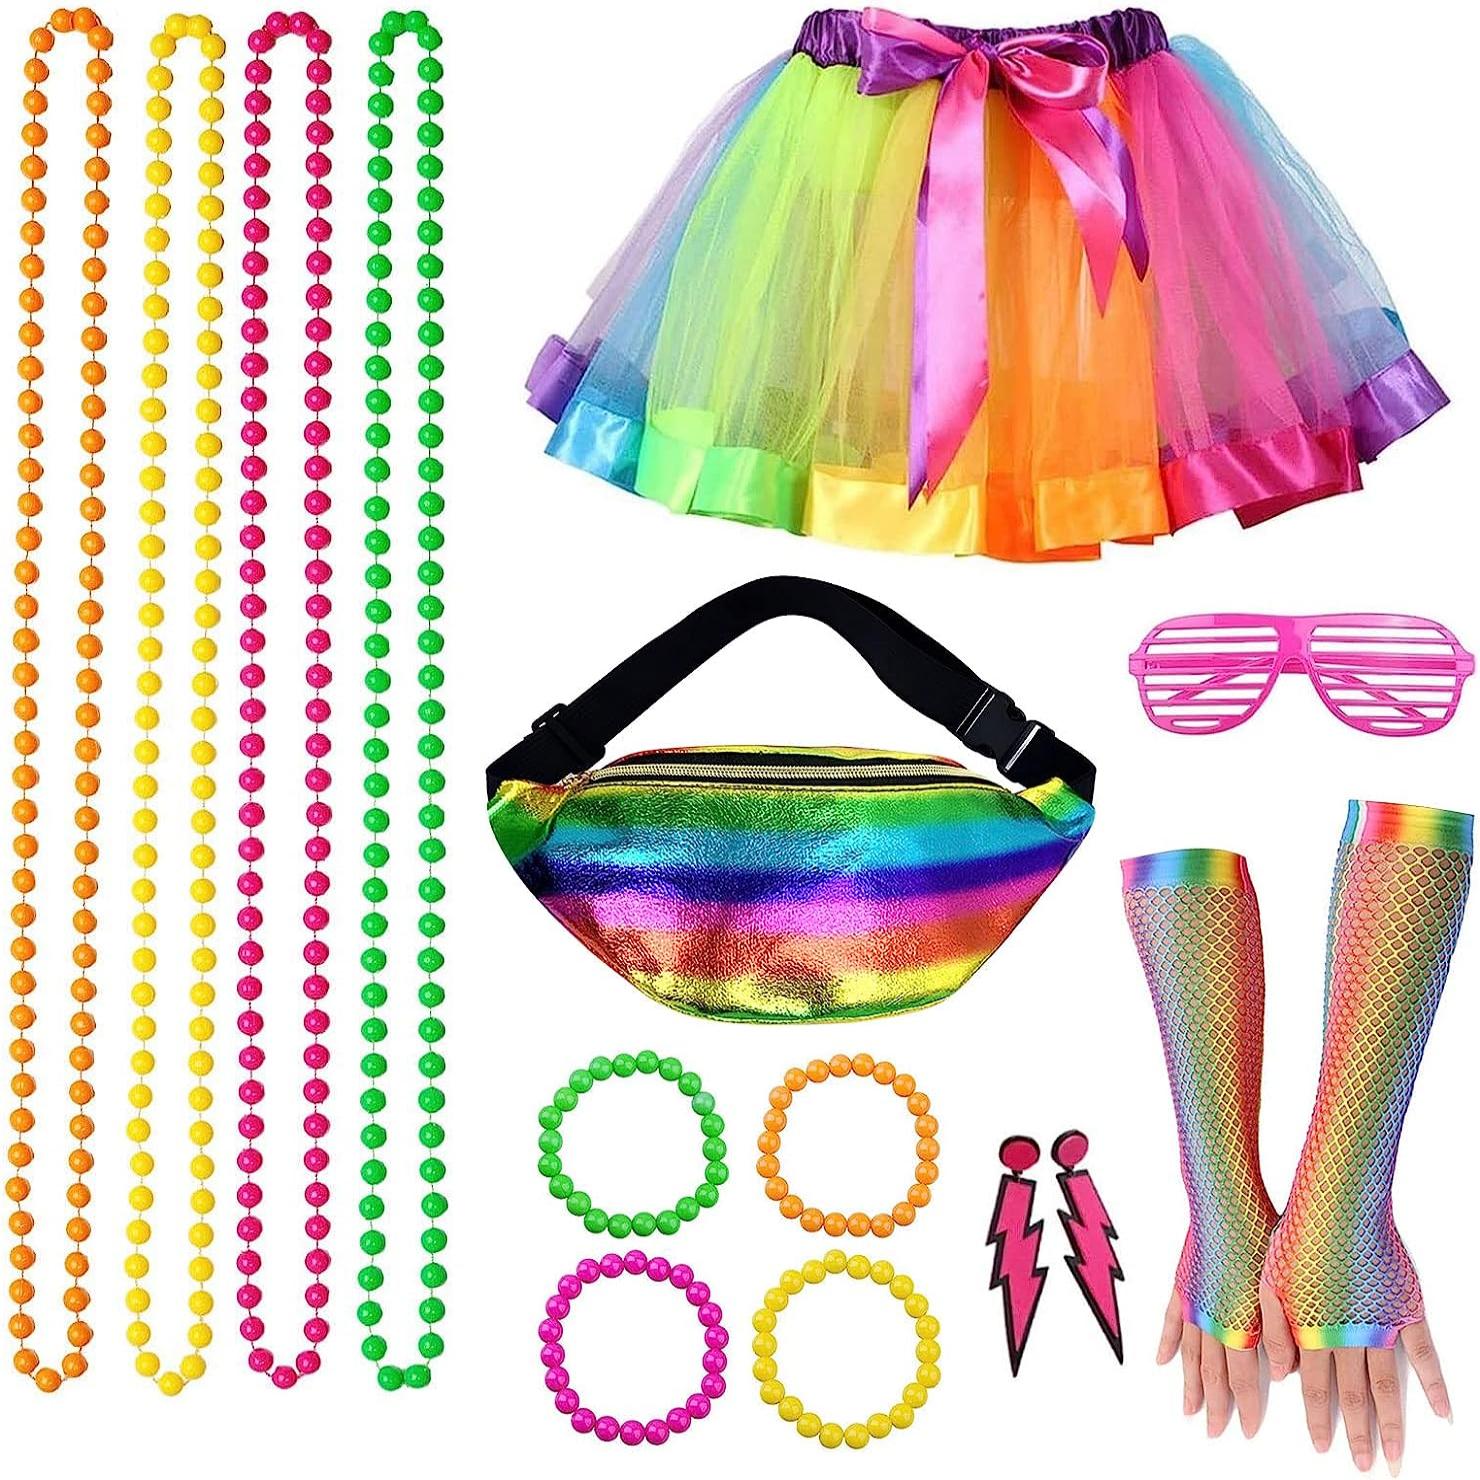 Neon Accessories Collection